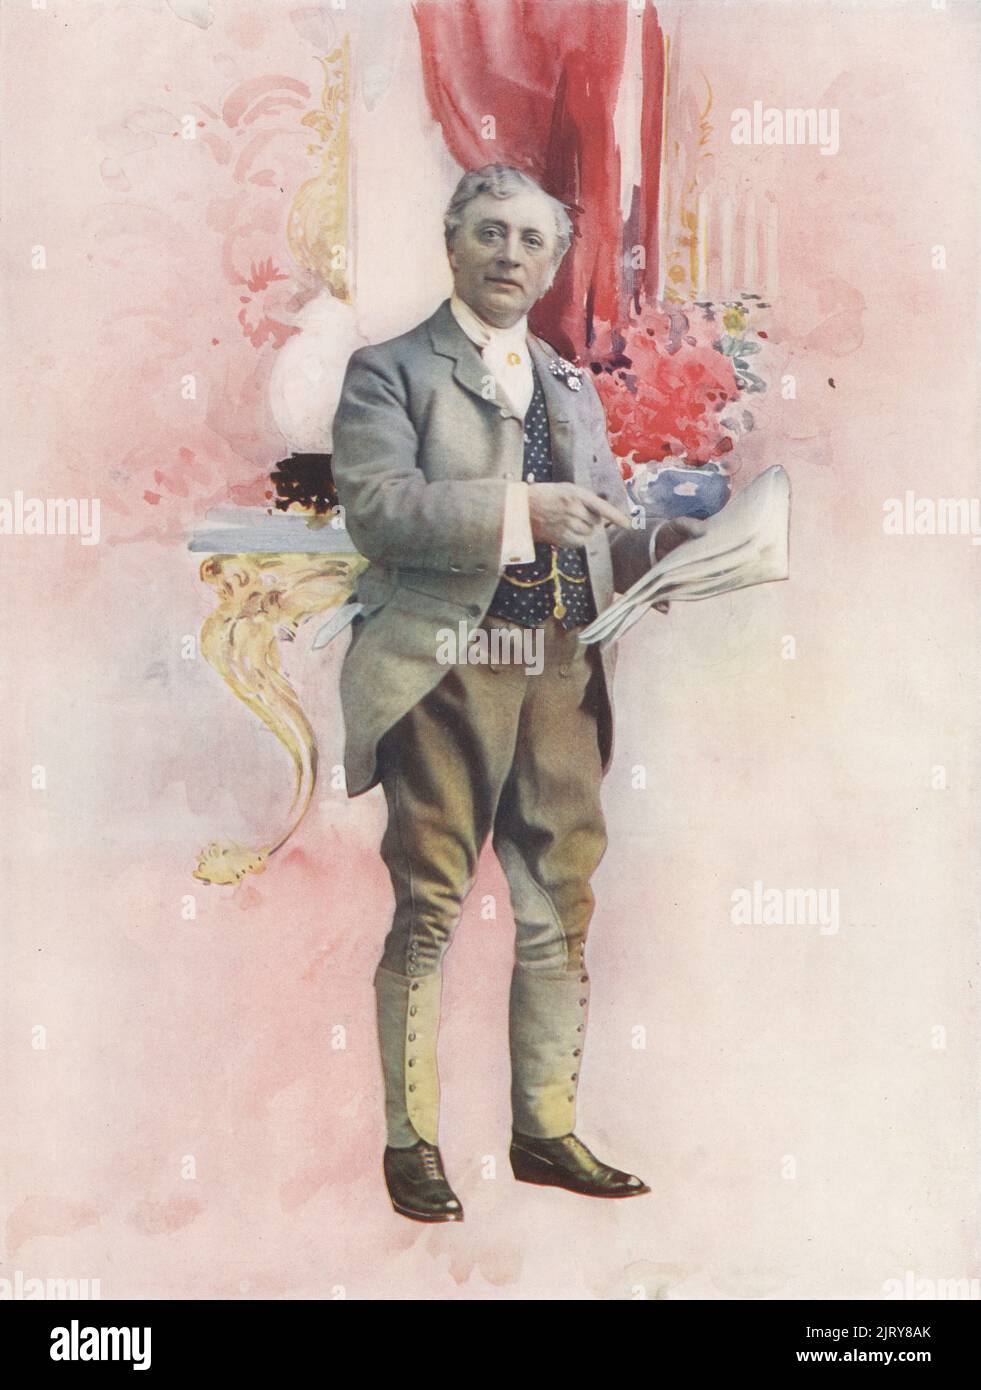 Charles Groves as Mr Blossom in The Elder Miss Blossom, St James Theatre, 1898. Charles Groves, Irish-born stage actor in Victorian comedies, 1843-1909. Photograph by Alfred Ellis and Walery (Stanislaw Julian Ignacy). Colour printing of a hand-coloured illustration based on a monochrome photograph from George Newnes’s Players of the Day, London, 1905. Stock Photo